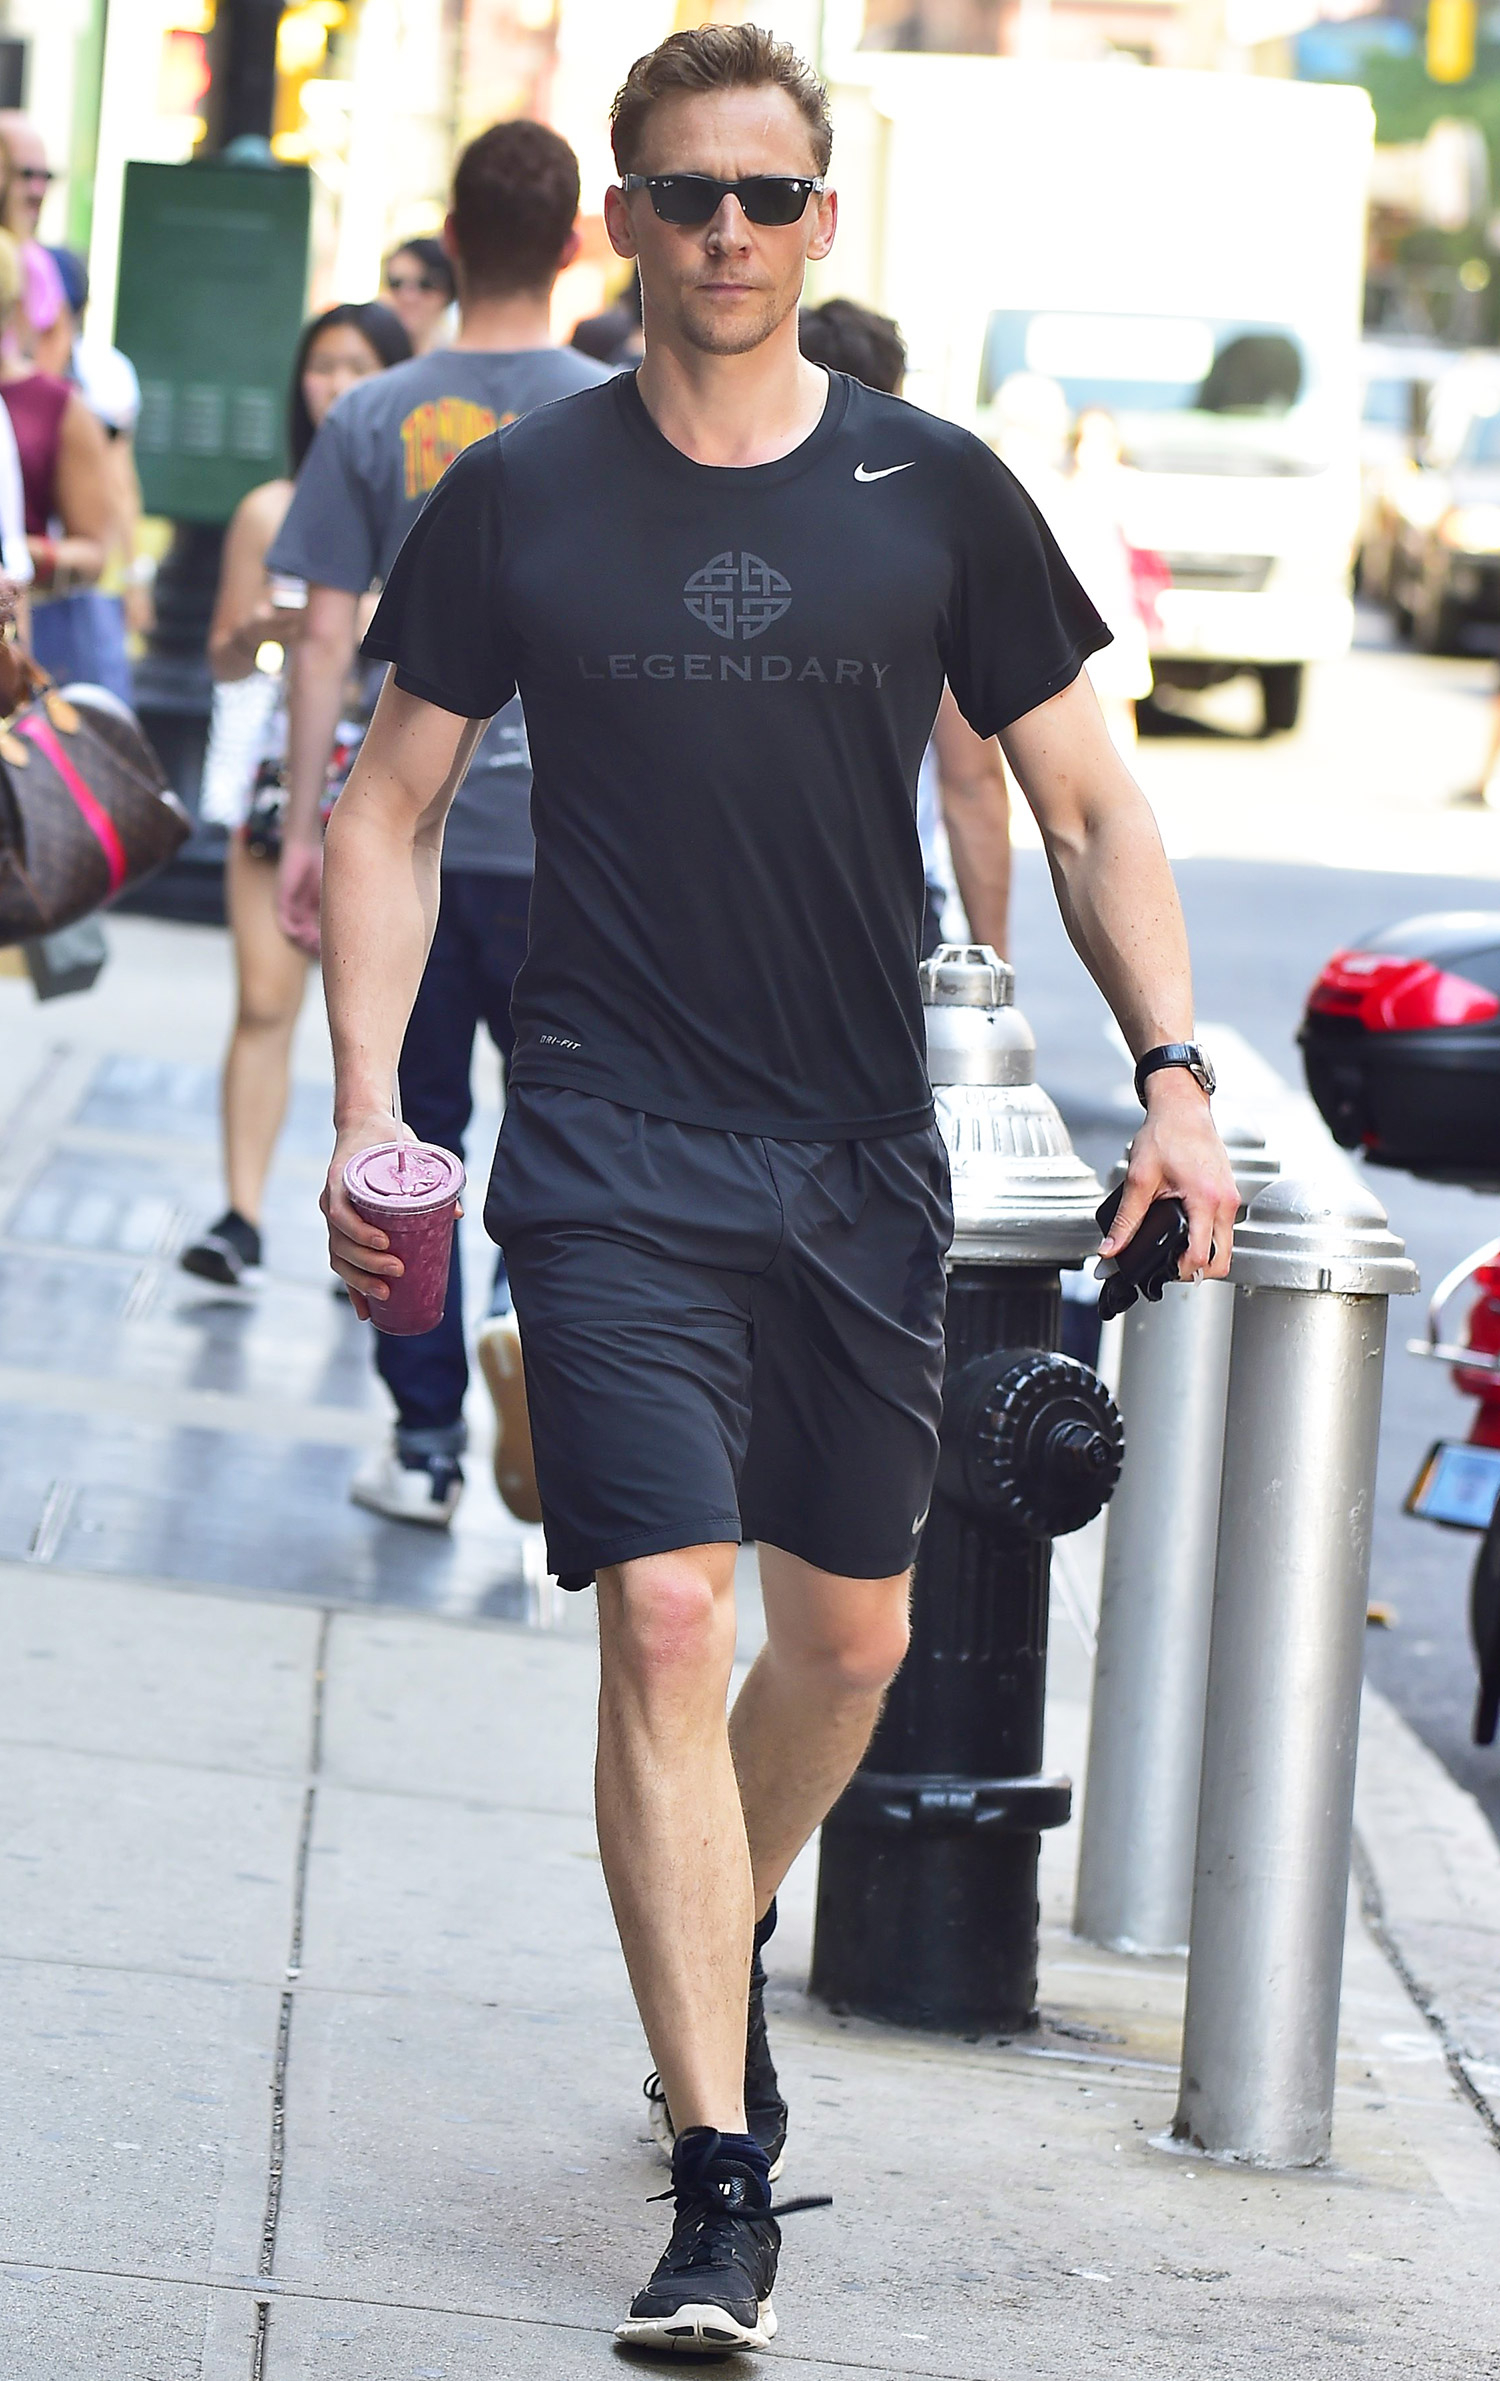 Tom Hiddleston Hits the Gym, Now We Wish We Were Taylor Swift